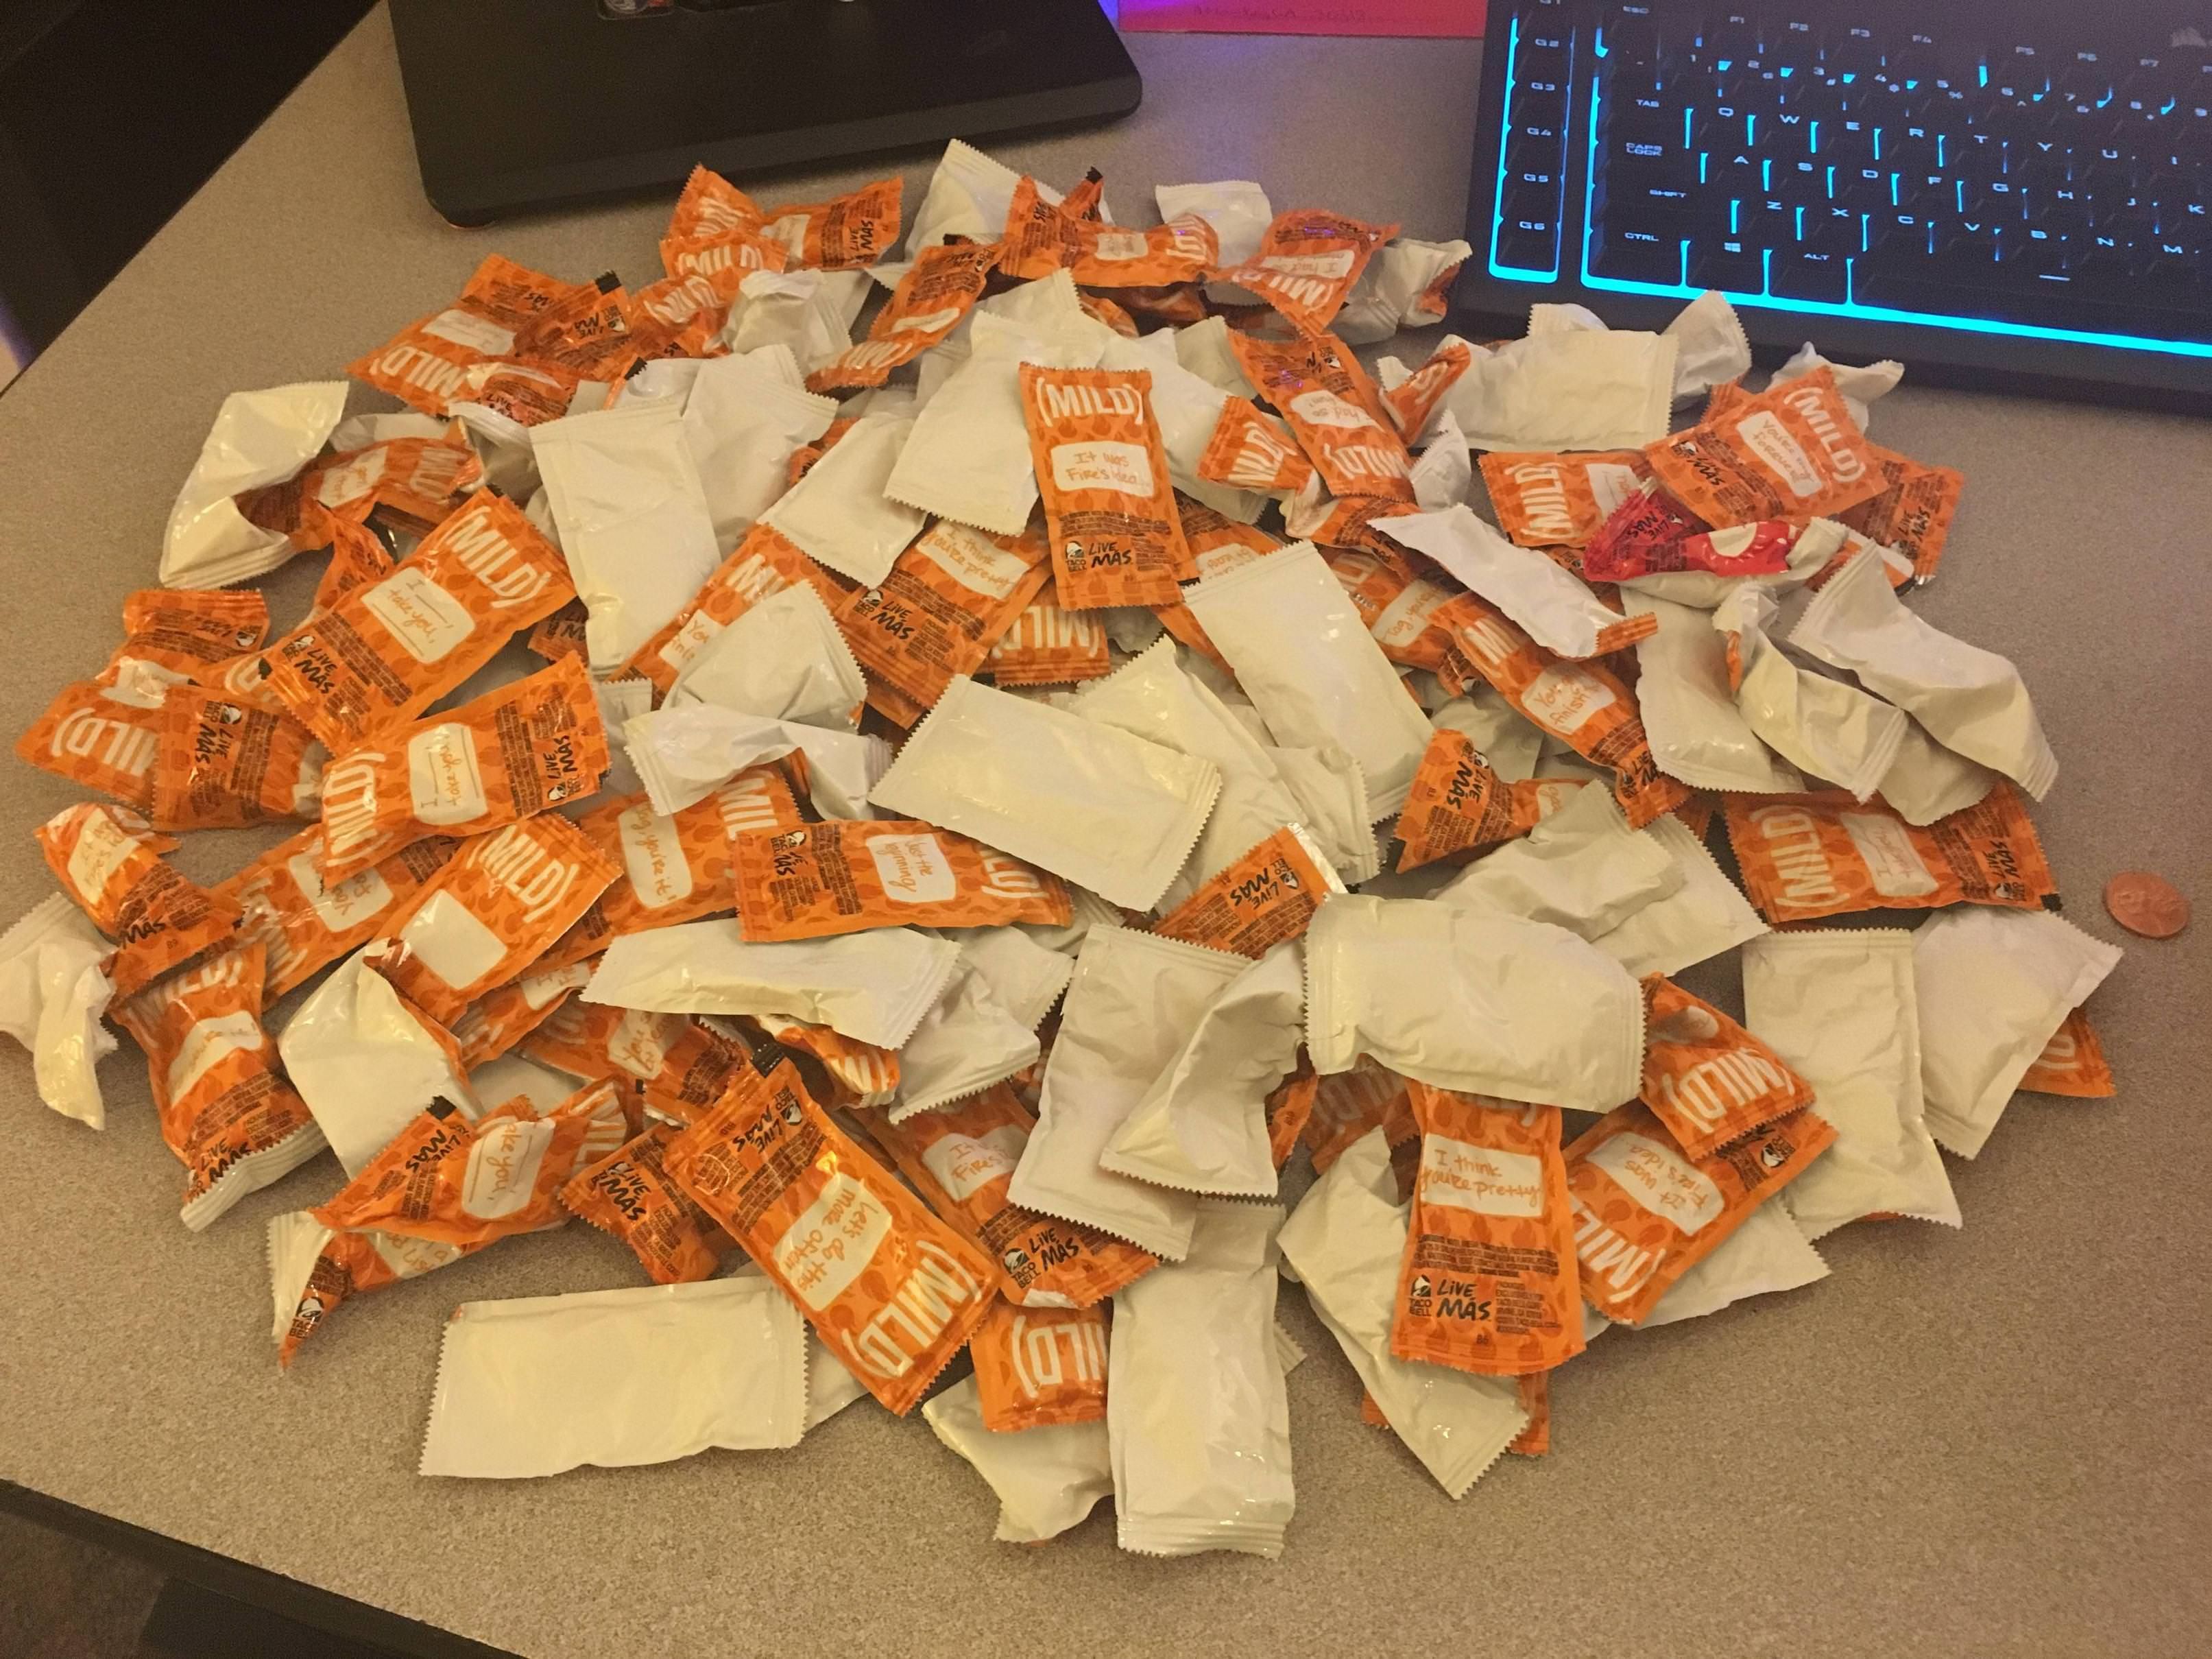 When you ask for "as much mild sauce as you can give me without getting fired". 175 packets.